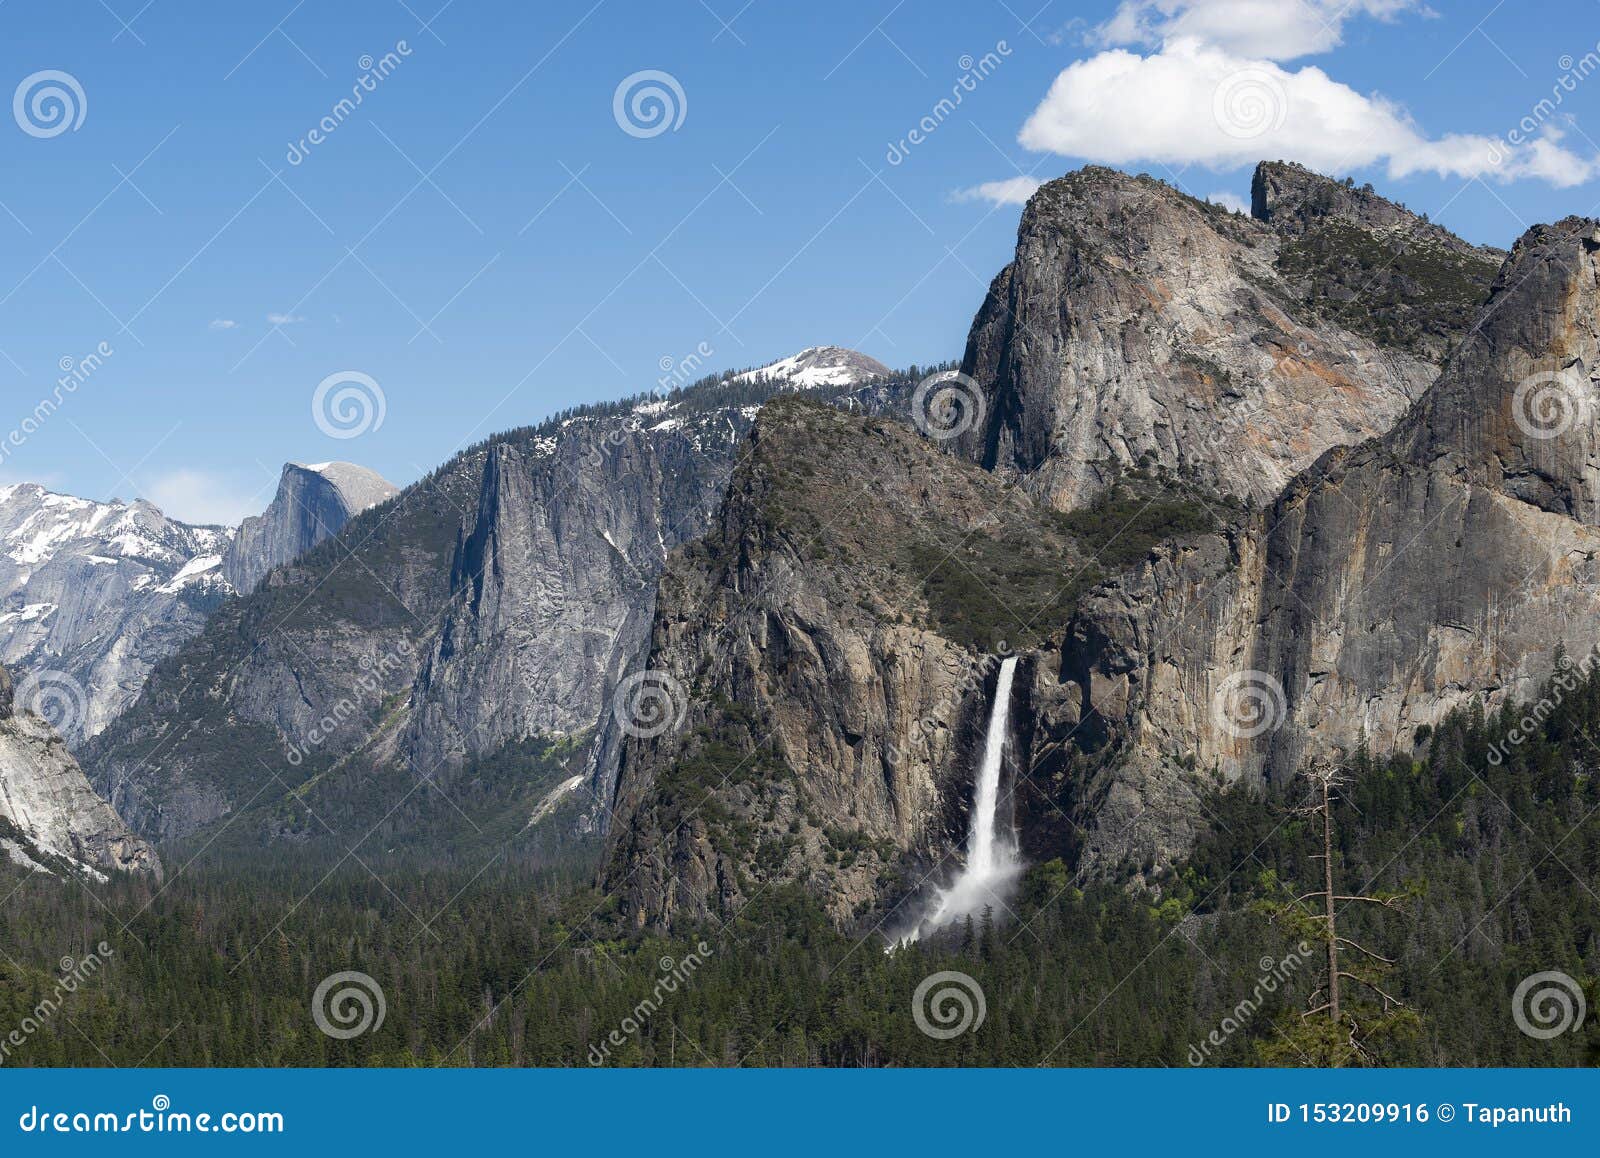 bridalveil falls as seen from yosemite valley tunnel view, california